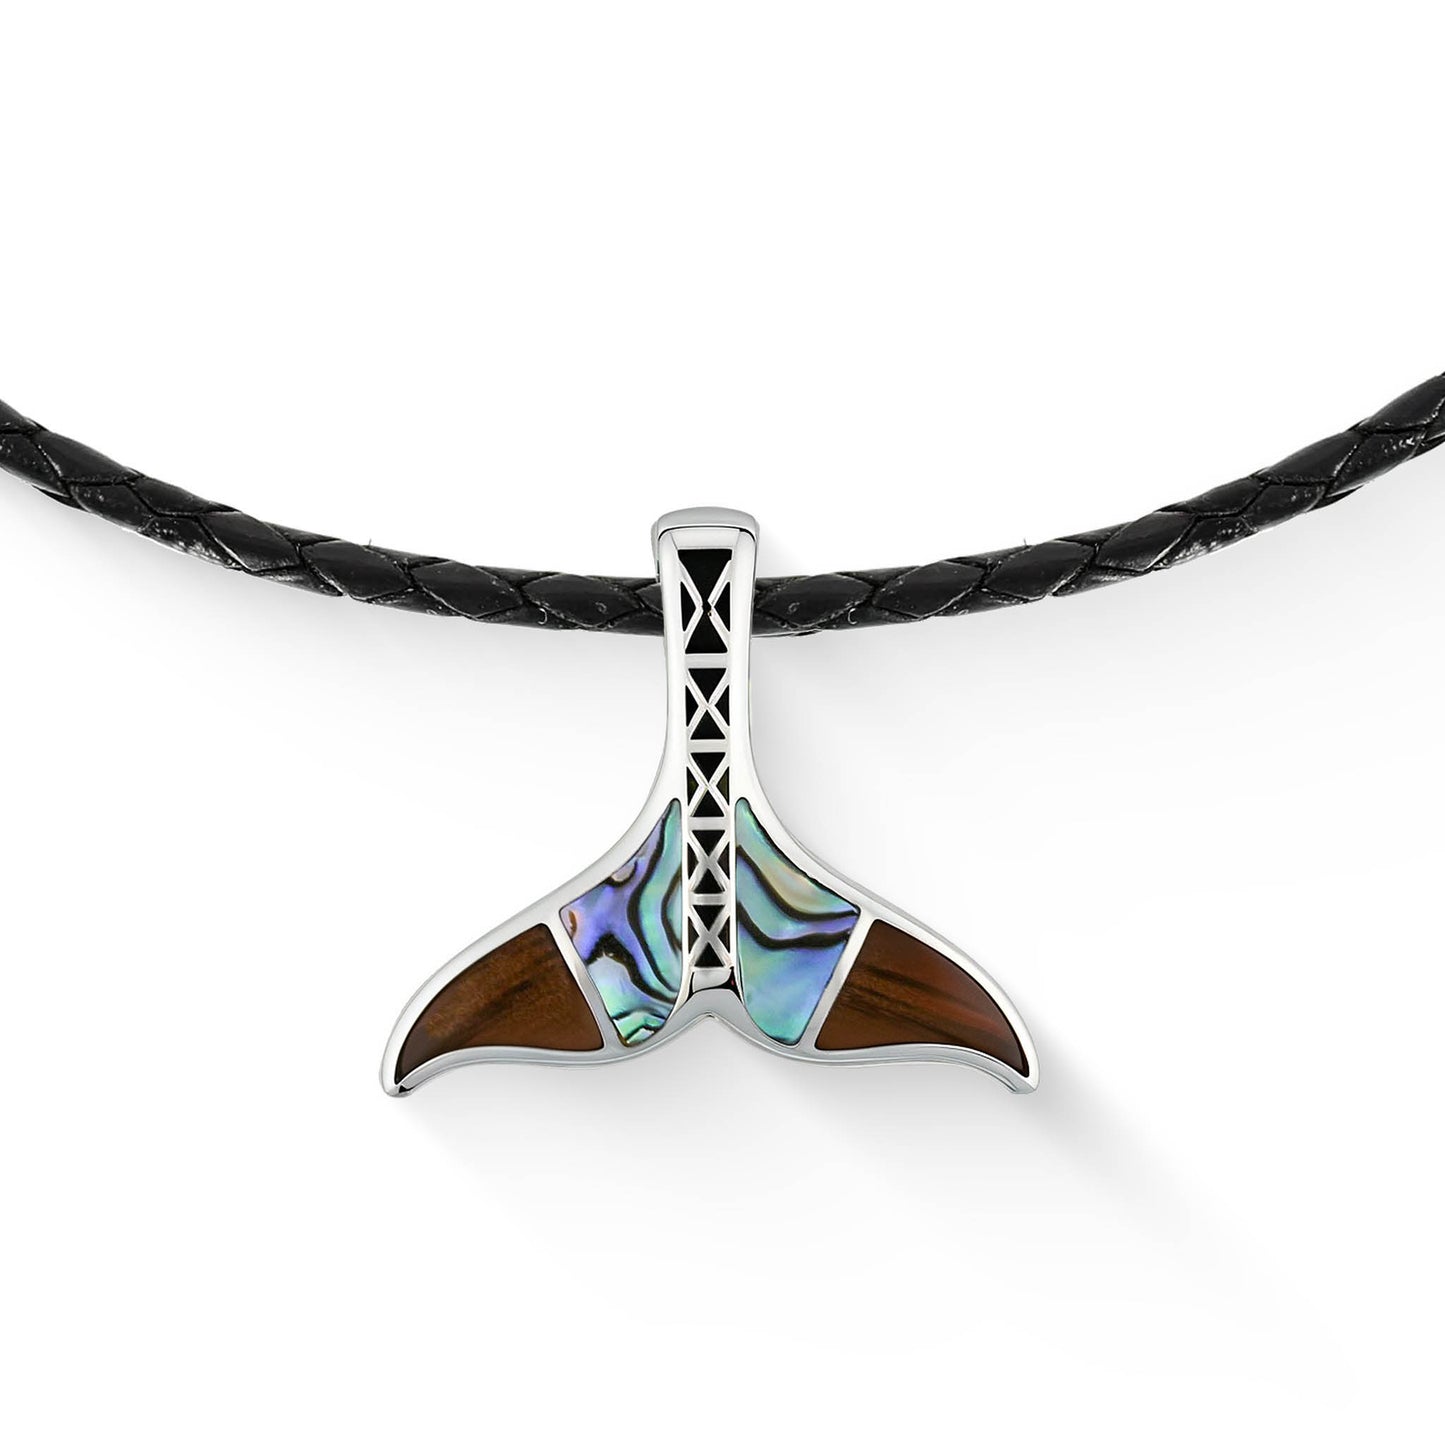 44766 - Sterling Silver - Whale Tail Pendant with Enamel, Abalone and Koa Wood